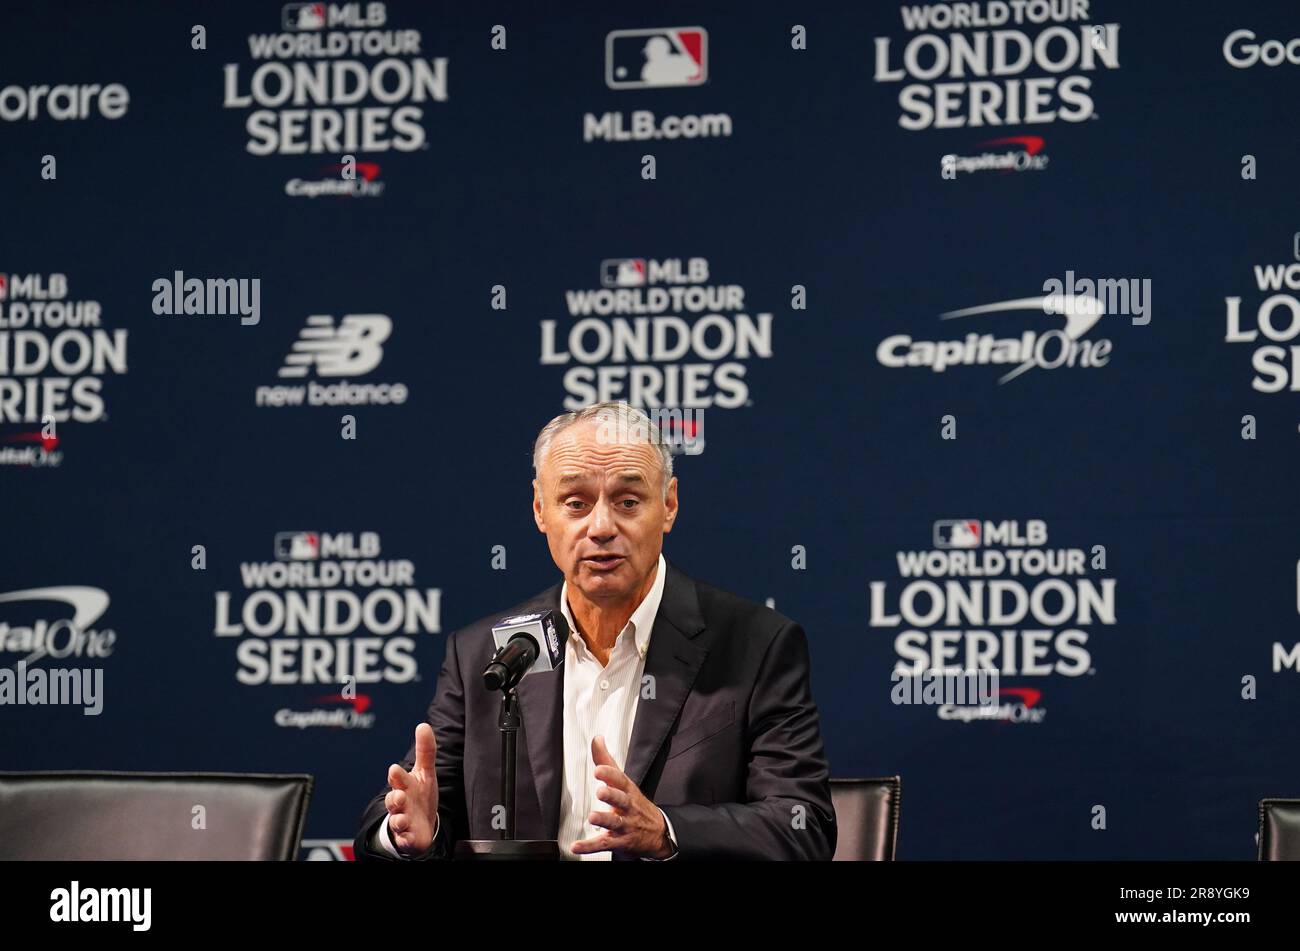 MLB Commissioner, Robert Manfred, speaks during a press conference during a workout day ahead of the MLB London Series Match at the London Stadium, London. Picture date: Friday June 23, 2023. Stock Photo